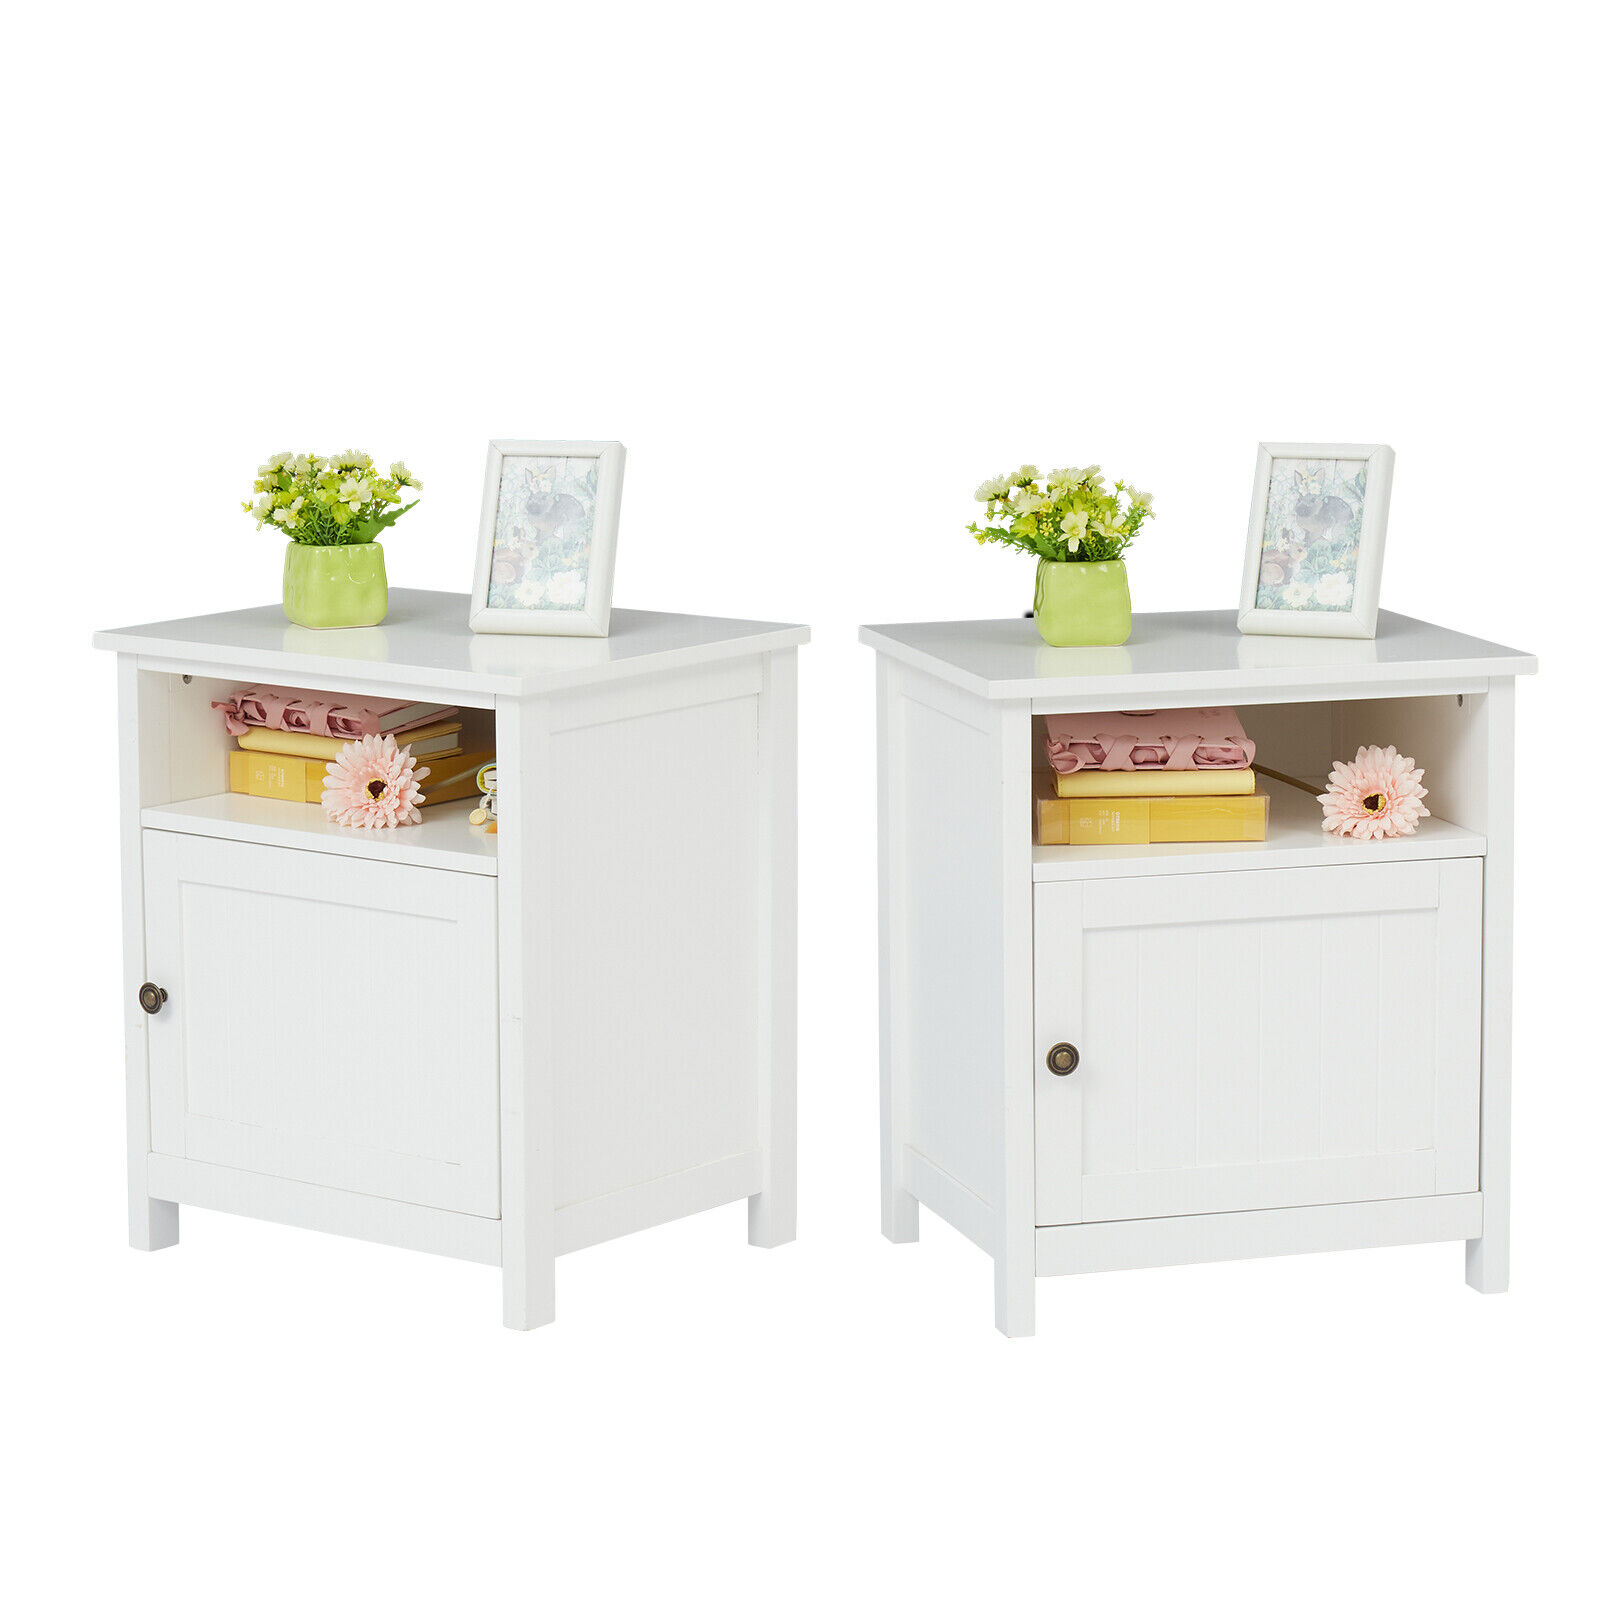 1- Door Nightstand Wooden Bedroom Bedside End 2 Table Austin Mall Shelf of Attention brand Storage with Set